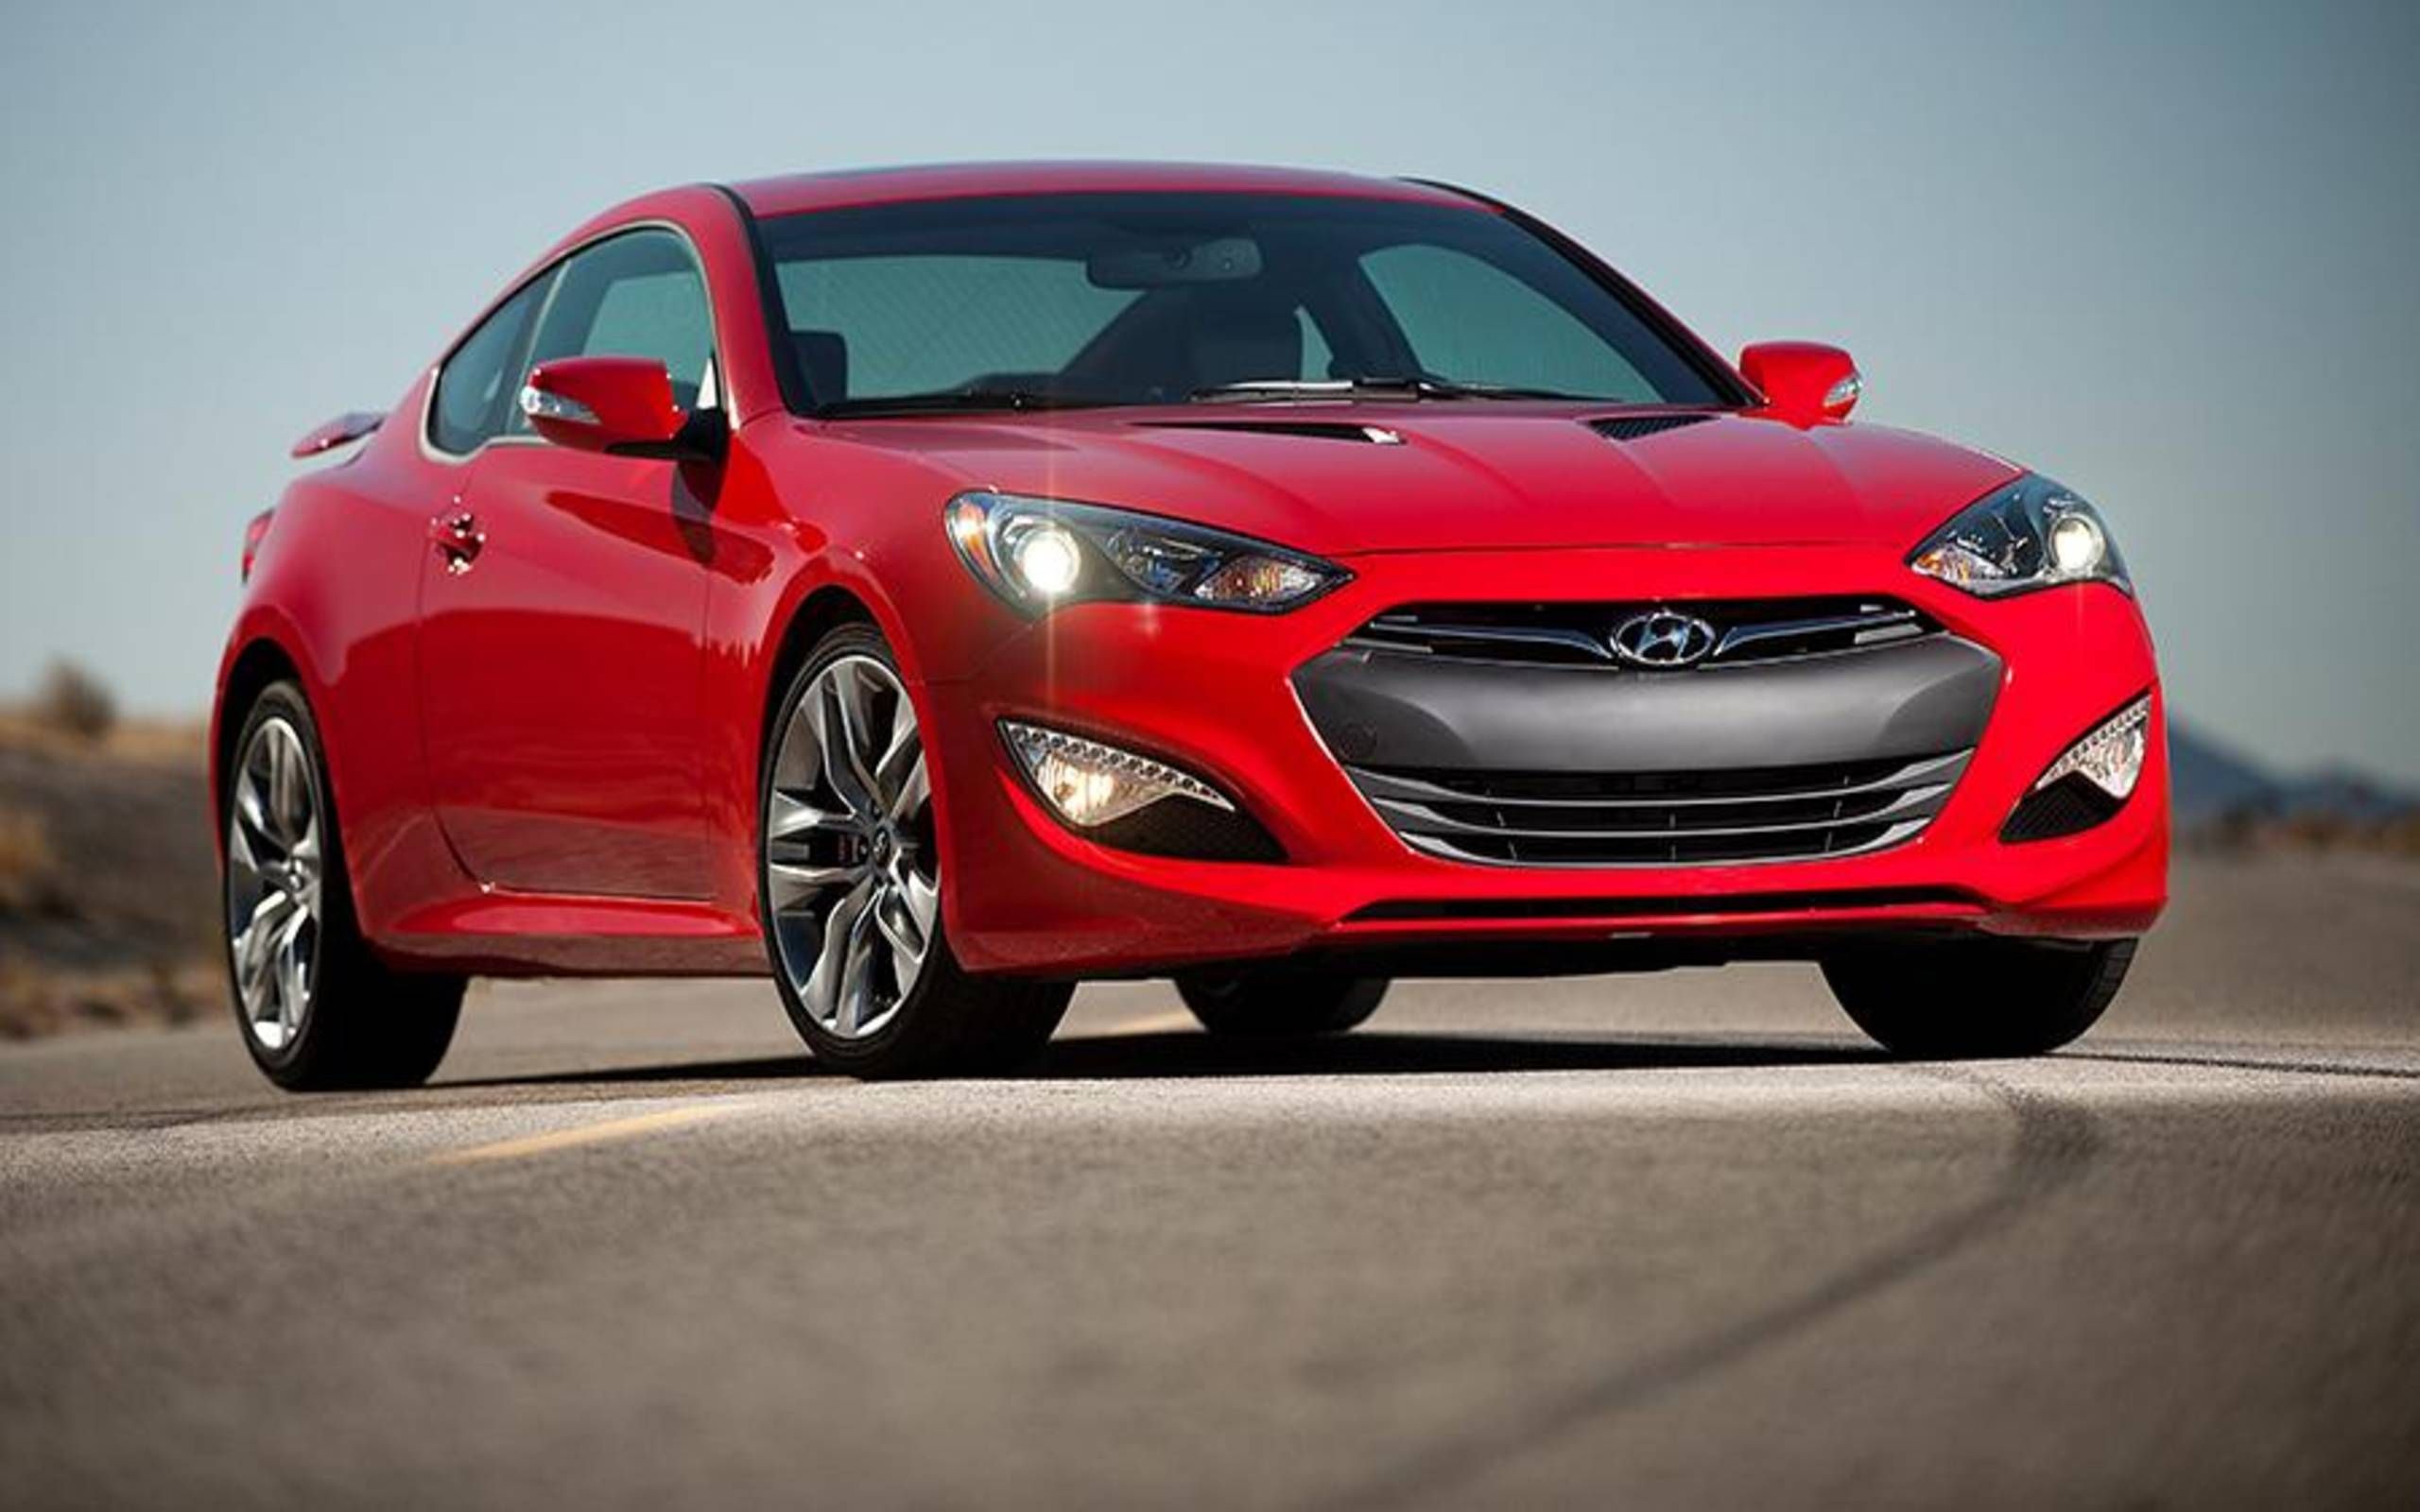 Here's what's new in the Hyundai Genesis coupe